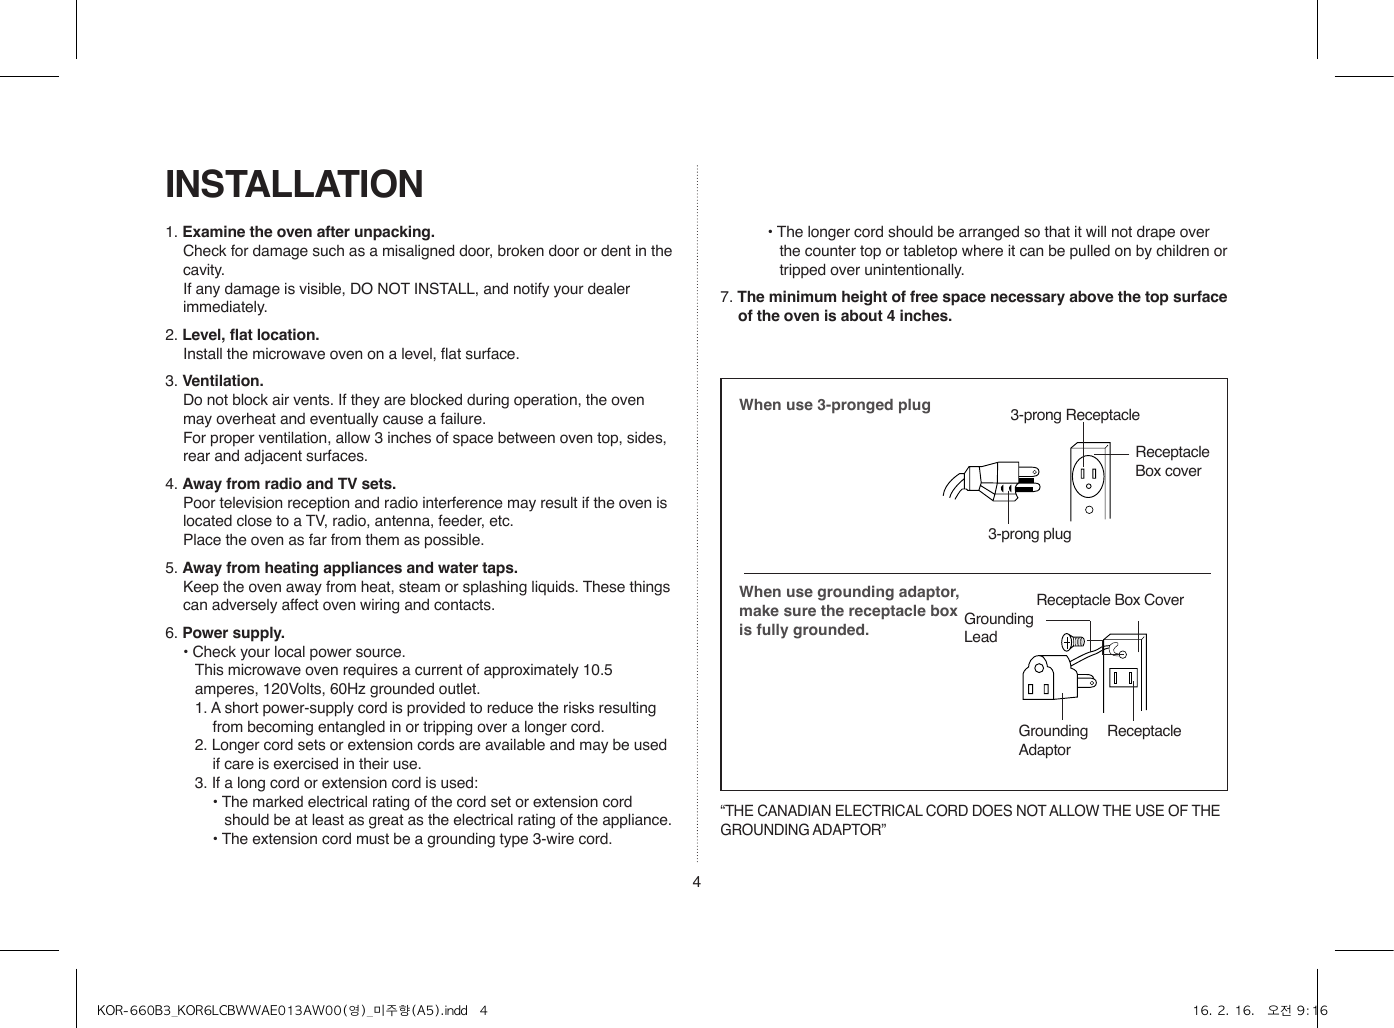 4INSTALLATION1. Examine the oven after unpacking.  Check for damage such as a misaligned door, broken door or dent in the cavity.   If any damage is visible, DO NOT INSTALL, and notify your dealer immediately.2. Level, flat location.  Install the microwave oven on a level, flat surface.3. Ventilation.  Do not block air vents. If they are blocked during operation, the oven may overheat and eventually cause a failure.   For proper ventilation, allow 3 inches of space between oven top, sides, rear and adjacent surfaces.4. Away from radio and TV sets.  Poor television reception and radio interference may result if the oven is located close to a TV, radio, antenna, feeder, etc.    Place the oven as far from them as possible.5. Away from heating appliances and water taps.  Keep the oven away from heat, steam or splashing liquids. These things can adversely affect oven wiring and contacts.6. Power supply.  • Check your local power source.This microwave oven requires a current of approximately 10.5 amperes, 120Volts, 60Hz grounded outlet.1. A short power-supply cord is provided to reduce the risks resulting from becoming entangled in or tripping over a longer cord.2. Longer cord sets or extension cords are available and may be used if care is exercised in their use.3. If a long cord or extension cord is used:• The marked electrical rating of the cord set or extension cord should be at least as great as the electrical rating of the appliance.• The extension cord must be a grounding type 3-wire cord.When use 3-pronged plugWhen use grounding adaptor, make sure the receptacle box is fully grounded.Receptacle Box CoverReceptacle GroundingAdaptor3-prong ReceptacleReceptacle Box cover3-prong plugGroundingLead“THE CANADIAN ELECTRICAL CORD DOES NOT ALLOW THE USE OF THE GROUNDING ADAPTOR”• The longer cord should be arranged so that it will not drape over the counter top or tabletop where it can be pulled on by children or tripped over unintentionally.7. The minimum height of free space necessary above the top surface of the oven is about 4 inches.KOR-660B3_KOR6LCBWWAE013AW00(영)_미주향(A5).indd   4 16. 2. 16.   오전 9:16